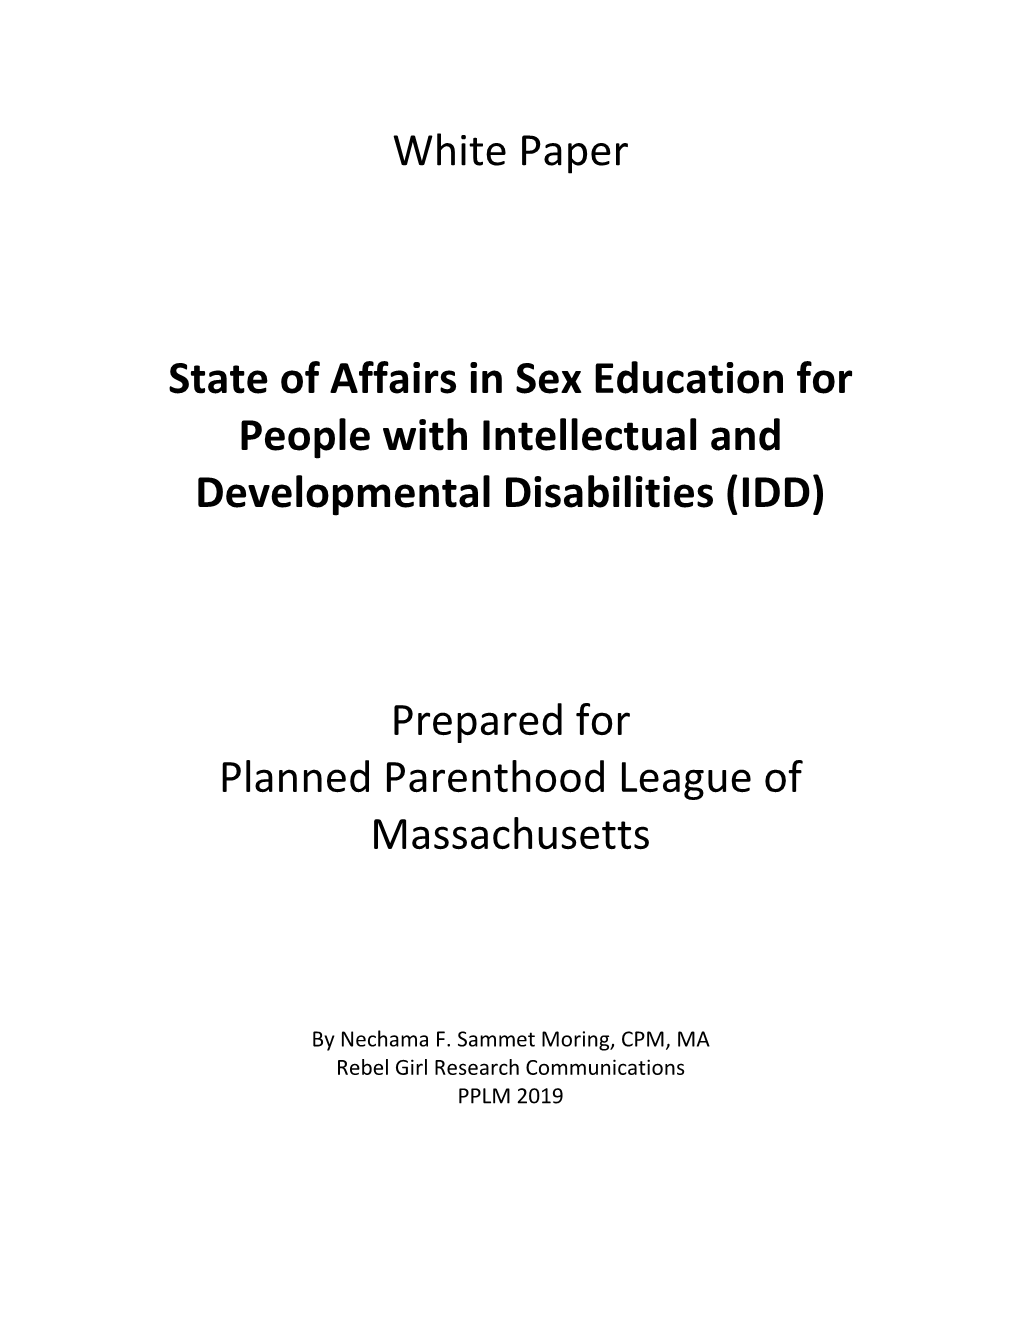 White Paper State of Affairs in Sex Education for People With